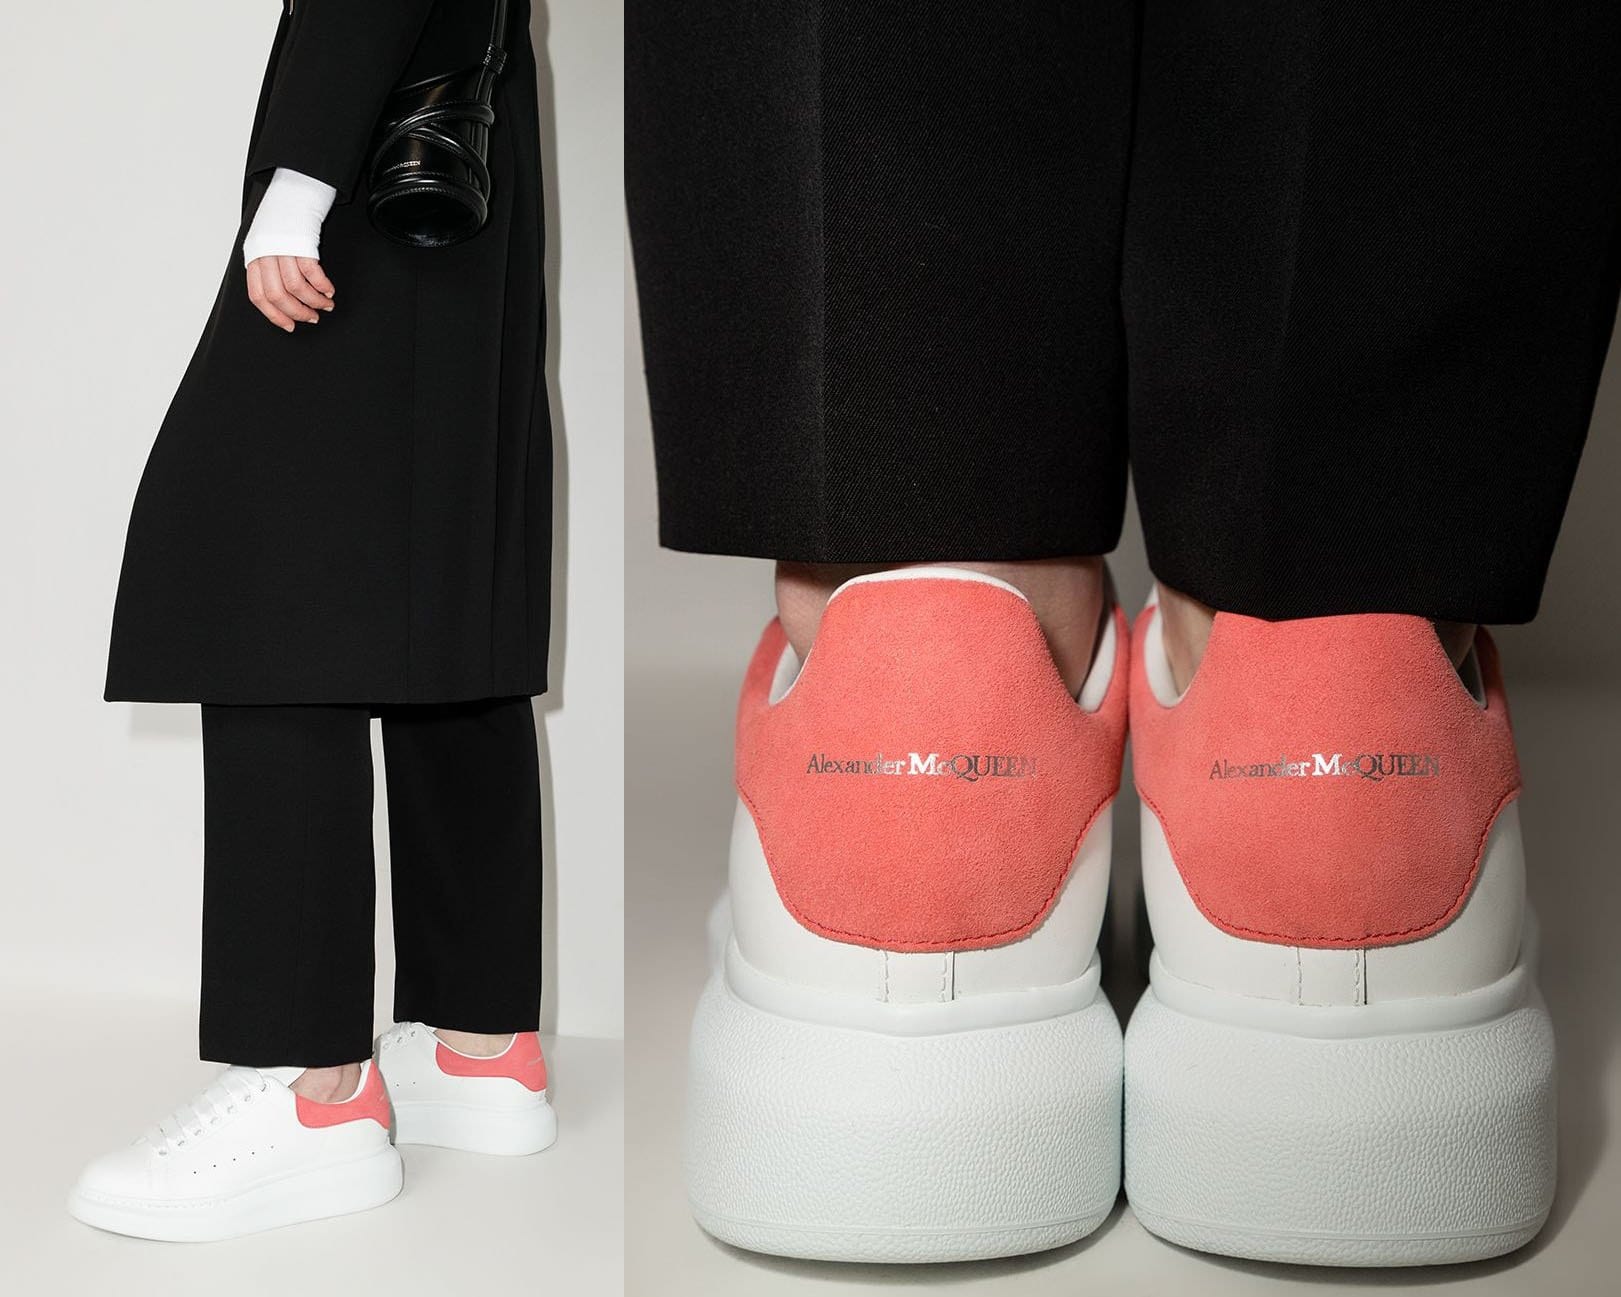 Alexander McQueen added a pink branded contrasting heel counter to their iconic Oversized Low-Top sneaker silhouette